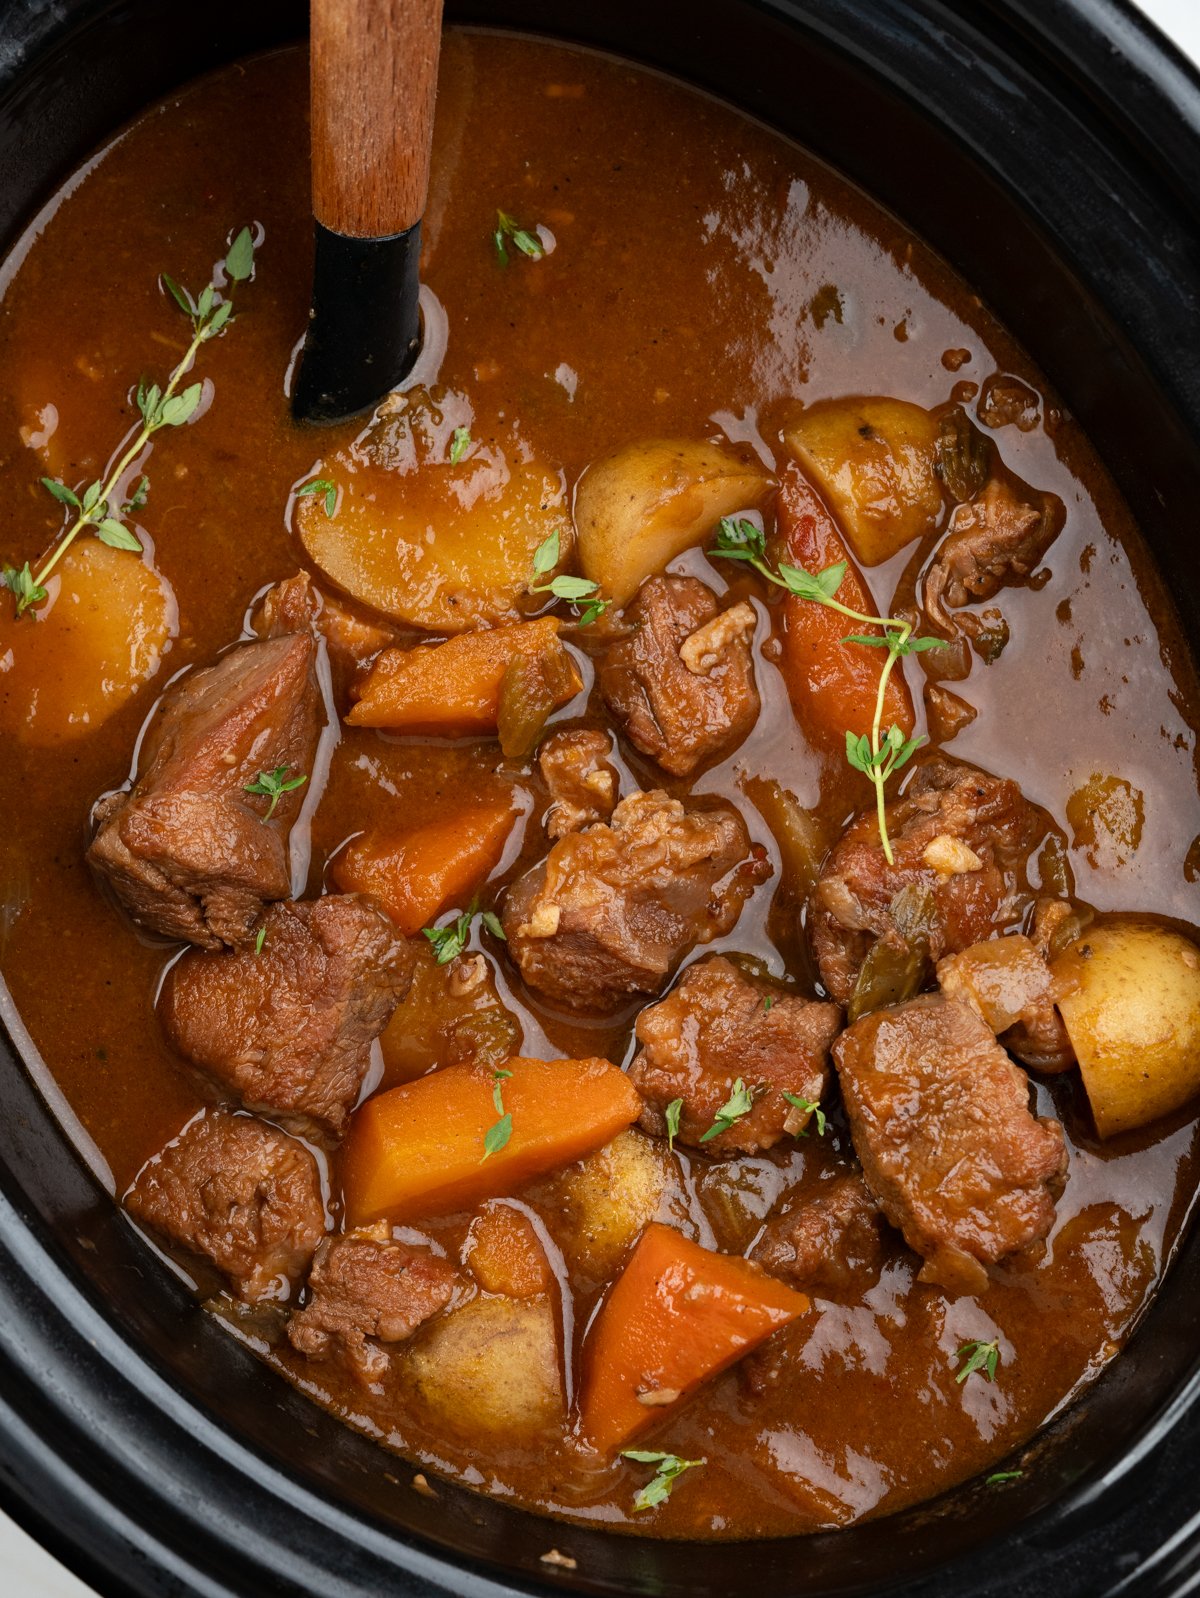 Slow-cooker lamb stew with tender, fall-apart lamb chunks, potatoes and carrot has a rustic flavourful thick broth